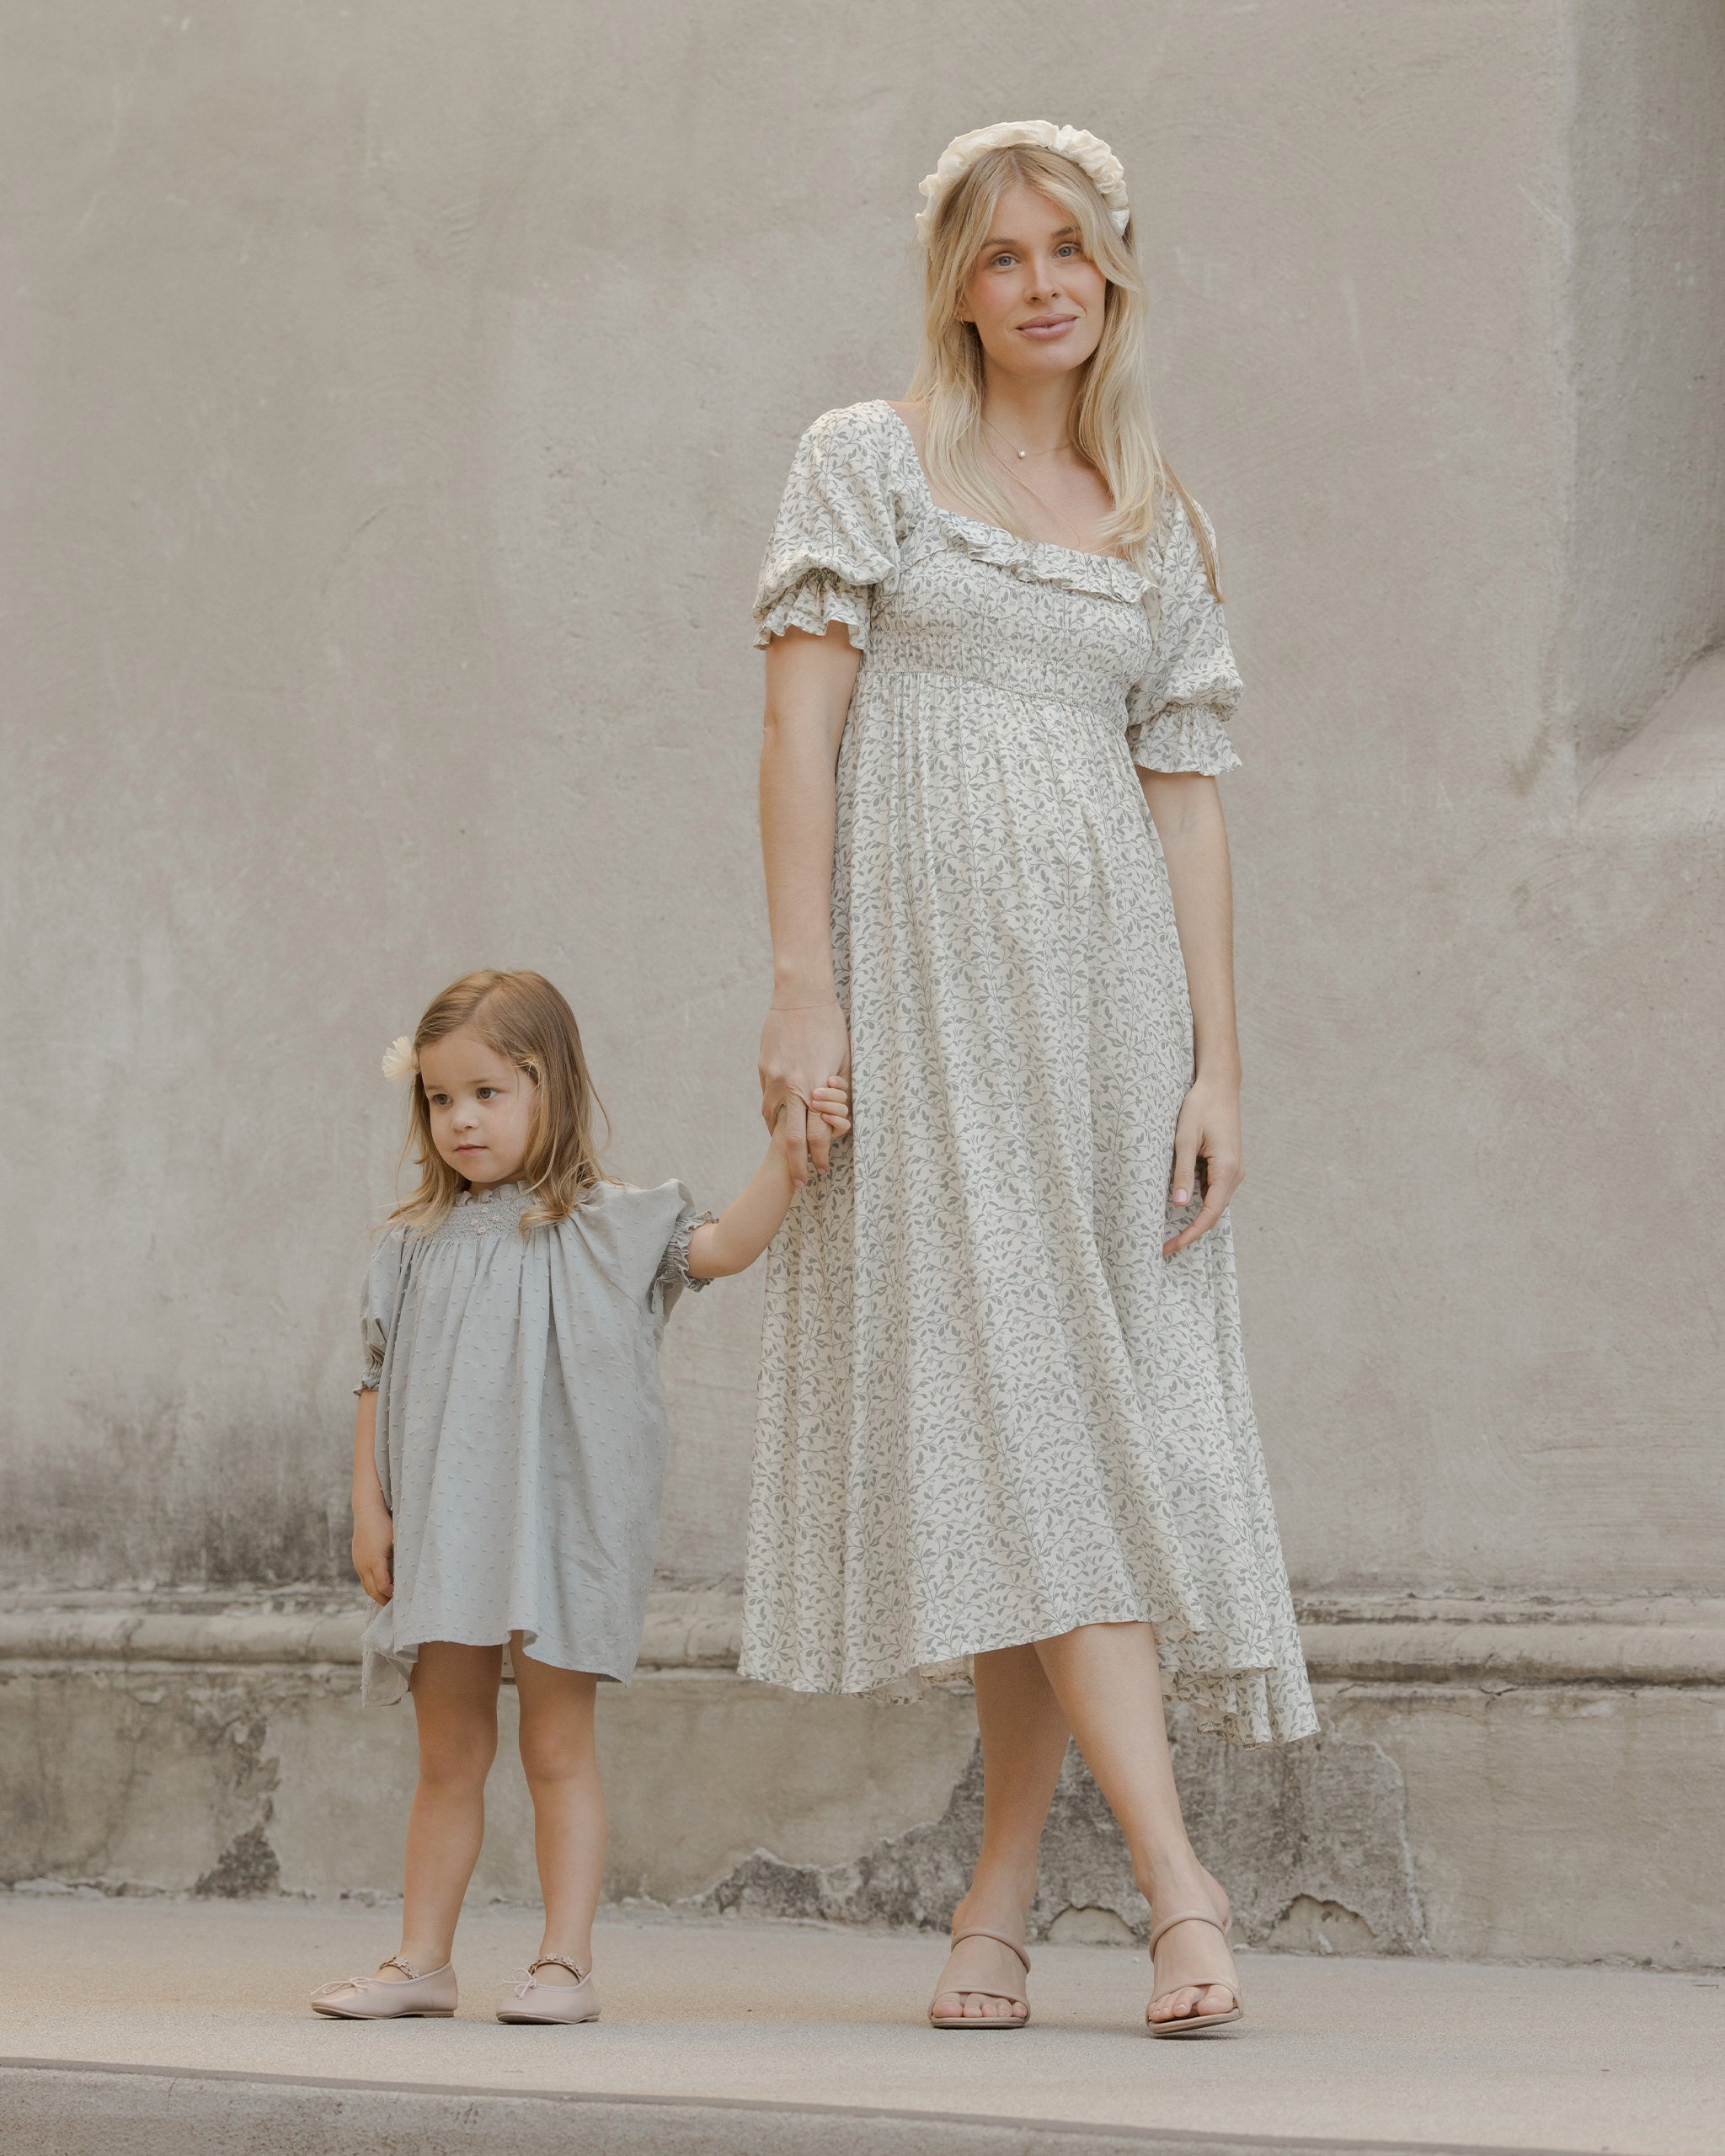 Birdie Dress | Lily Fields - Rylee + Cru | Kids Clothes | Trendy Baby Clothes | Modern Infant Outfits |